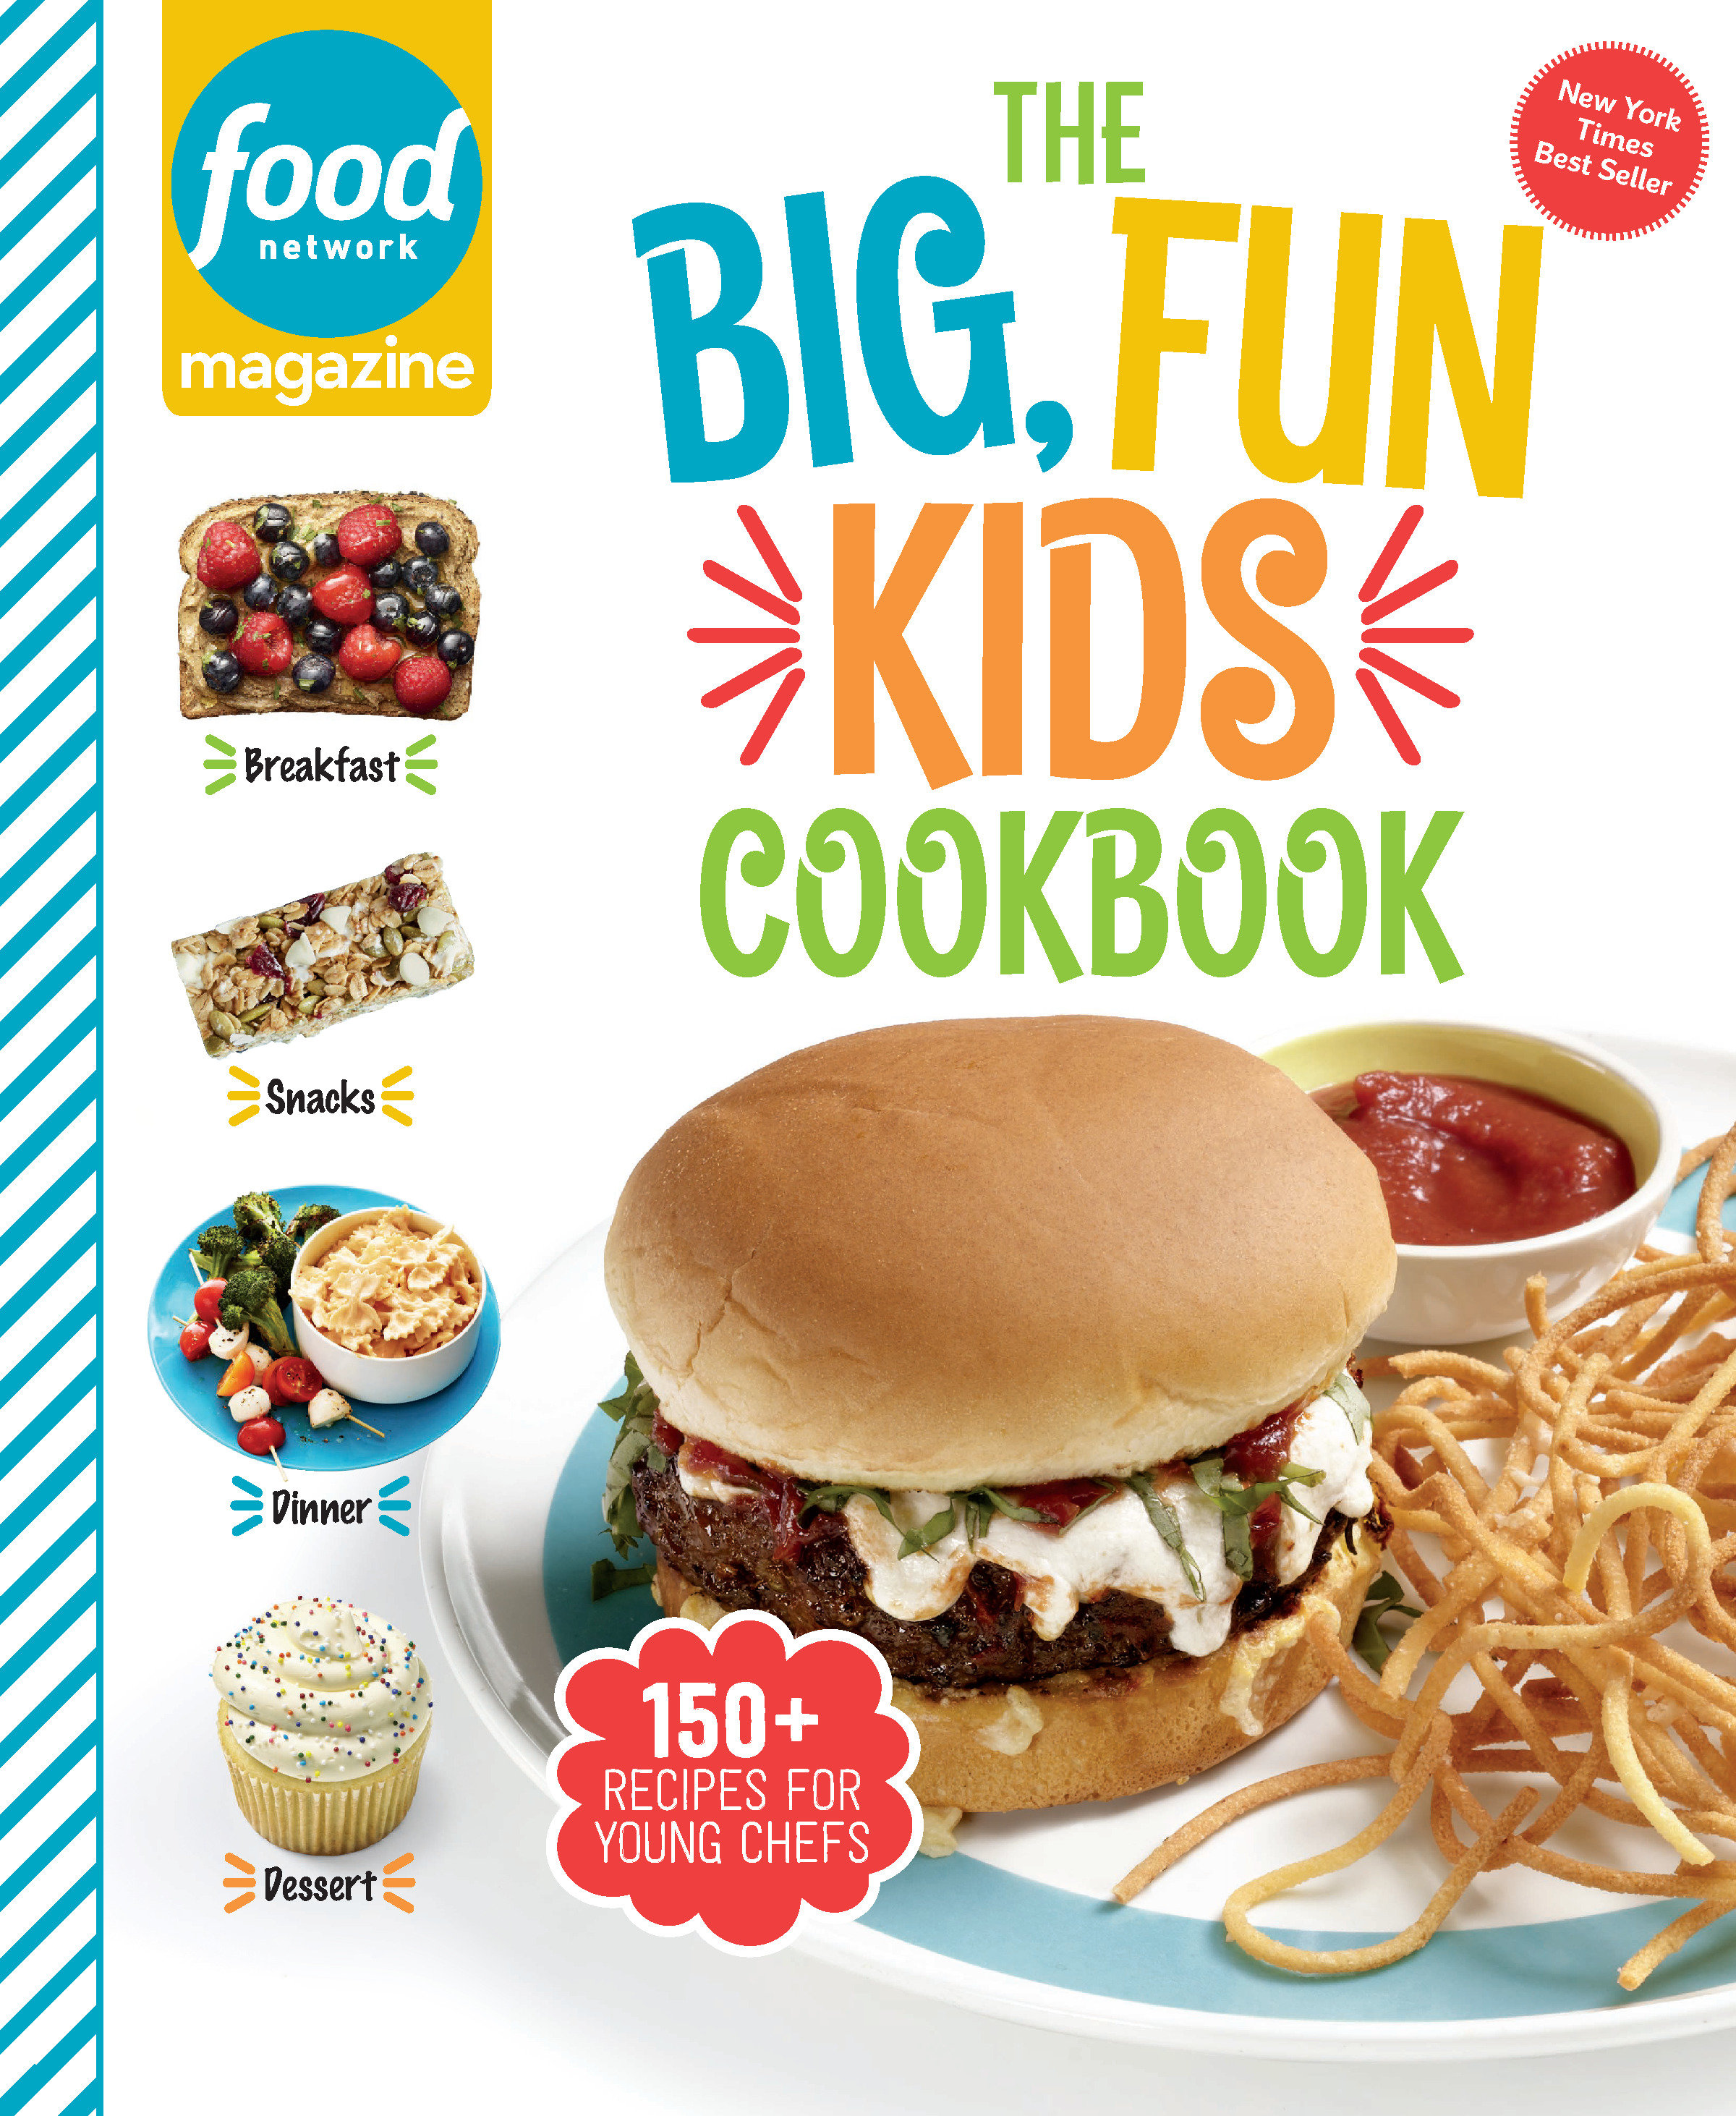 Umschlagbild für Food Network Magazine The Big, Fun Kids Cookbook [electronic resource] : 150+ Recipes for Young Chefs